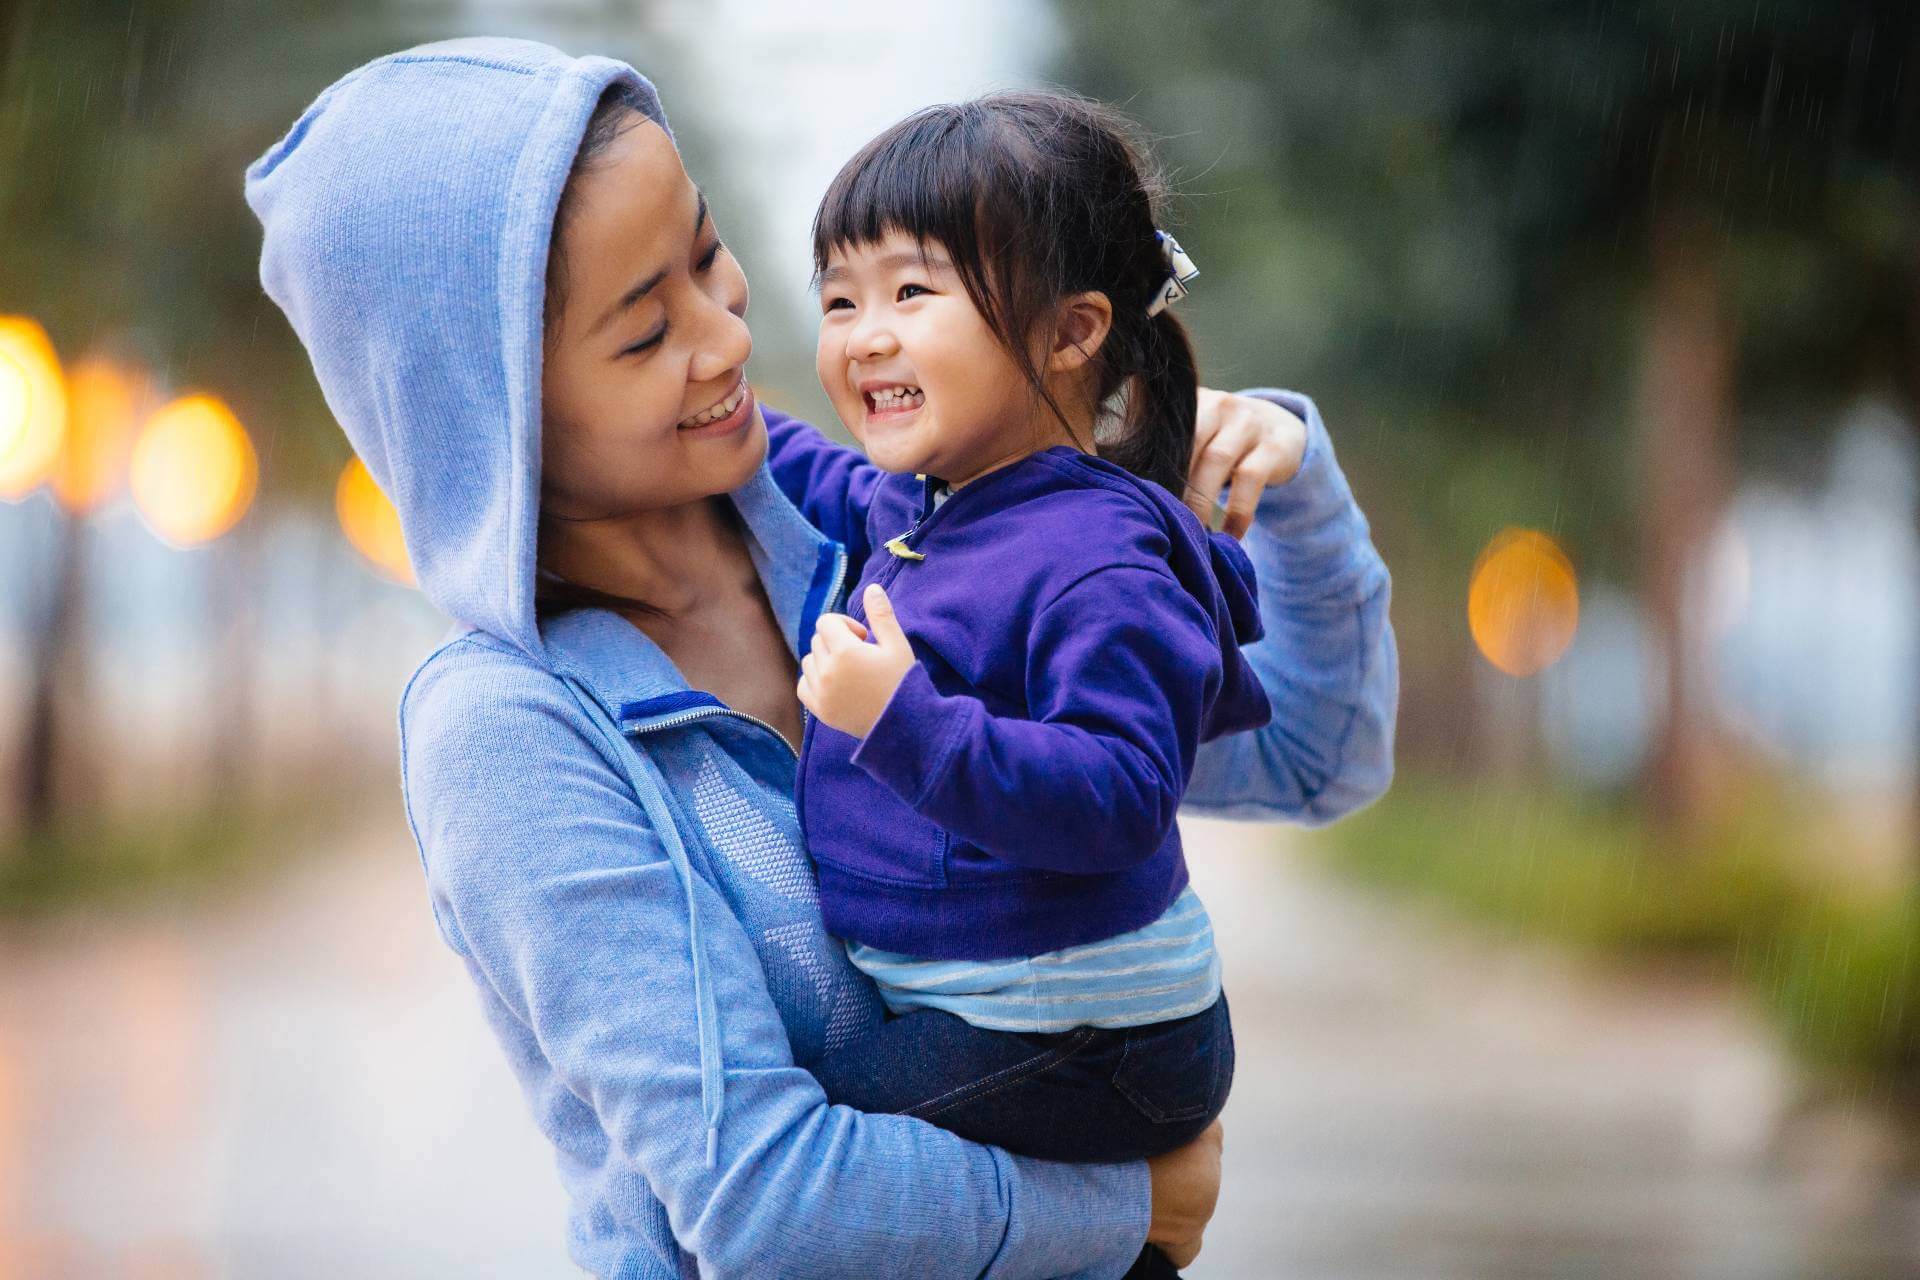 Mom in blue hooded shirt holds child